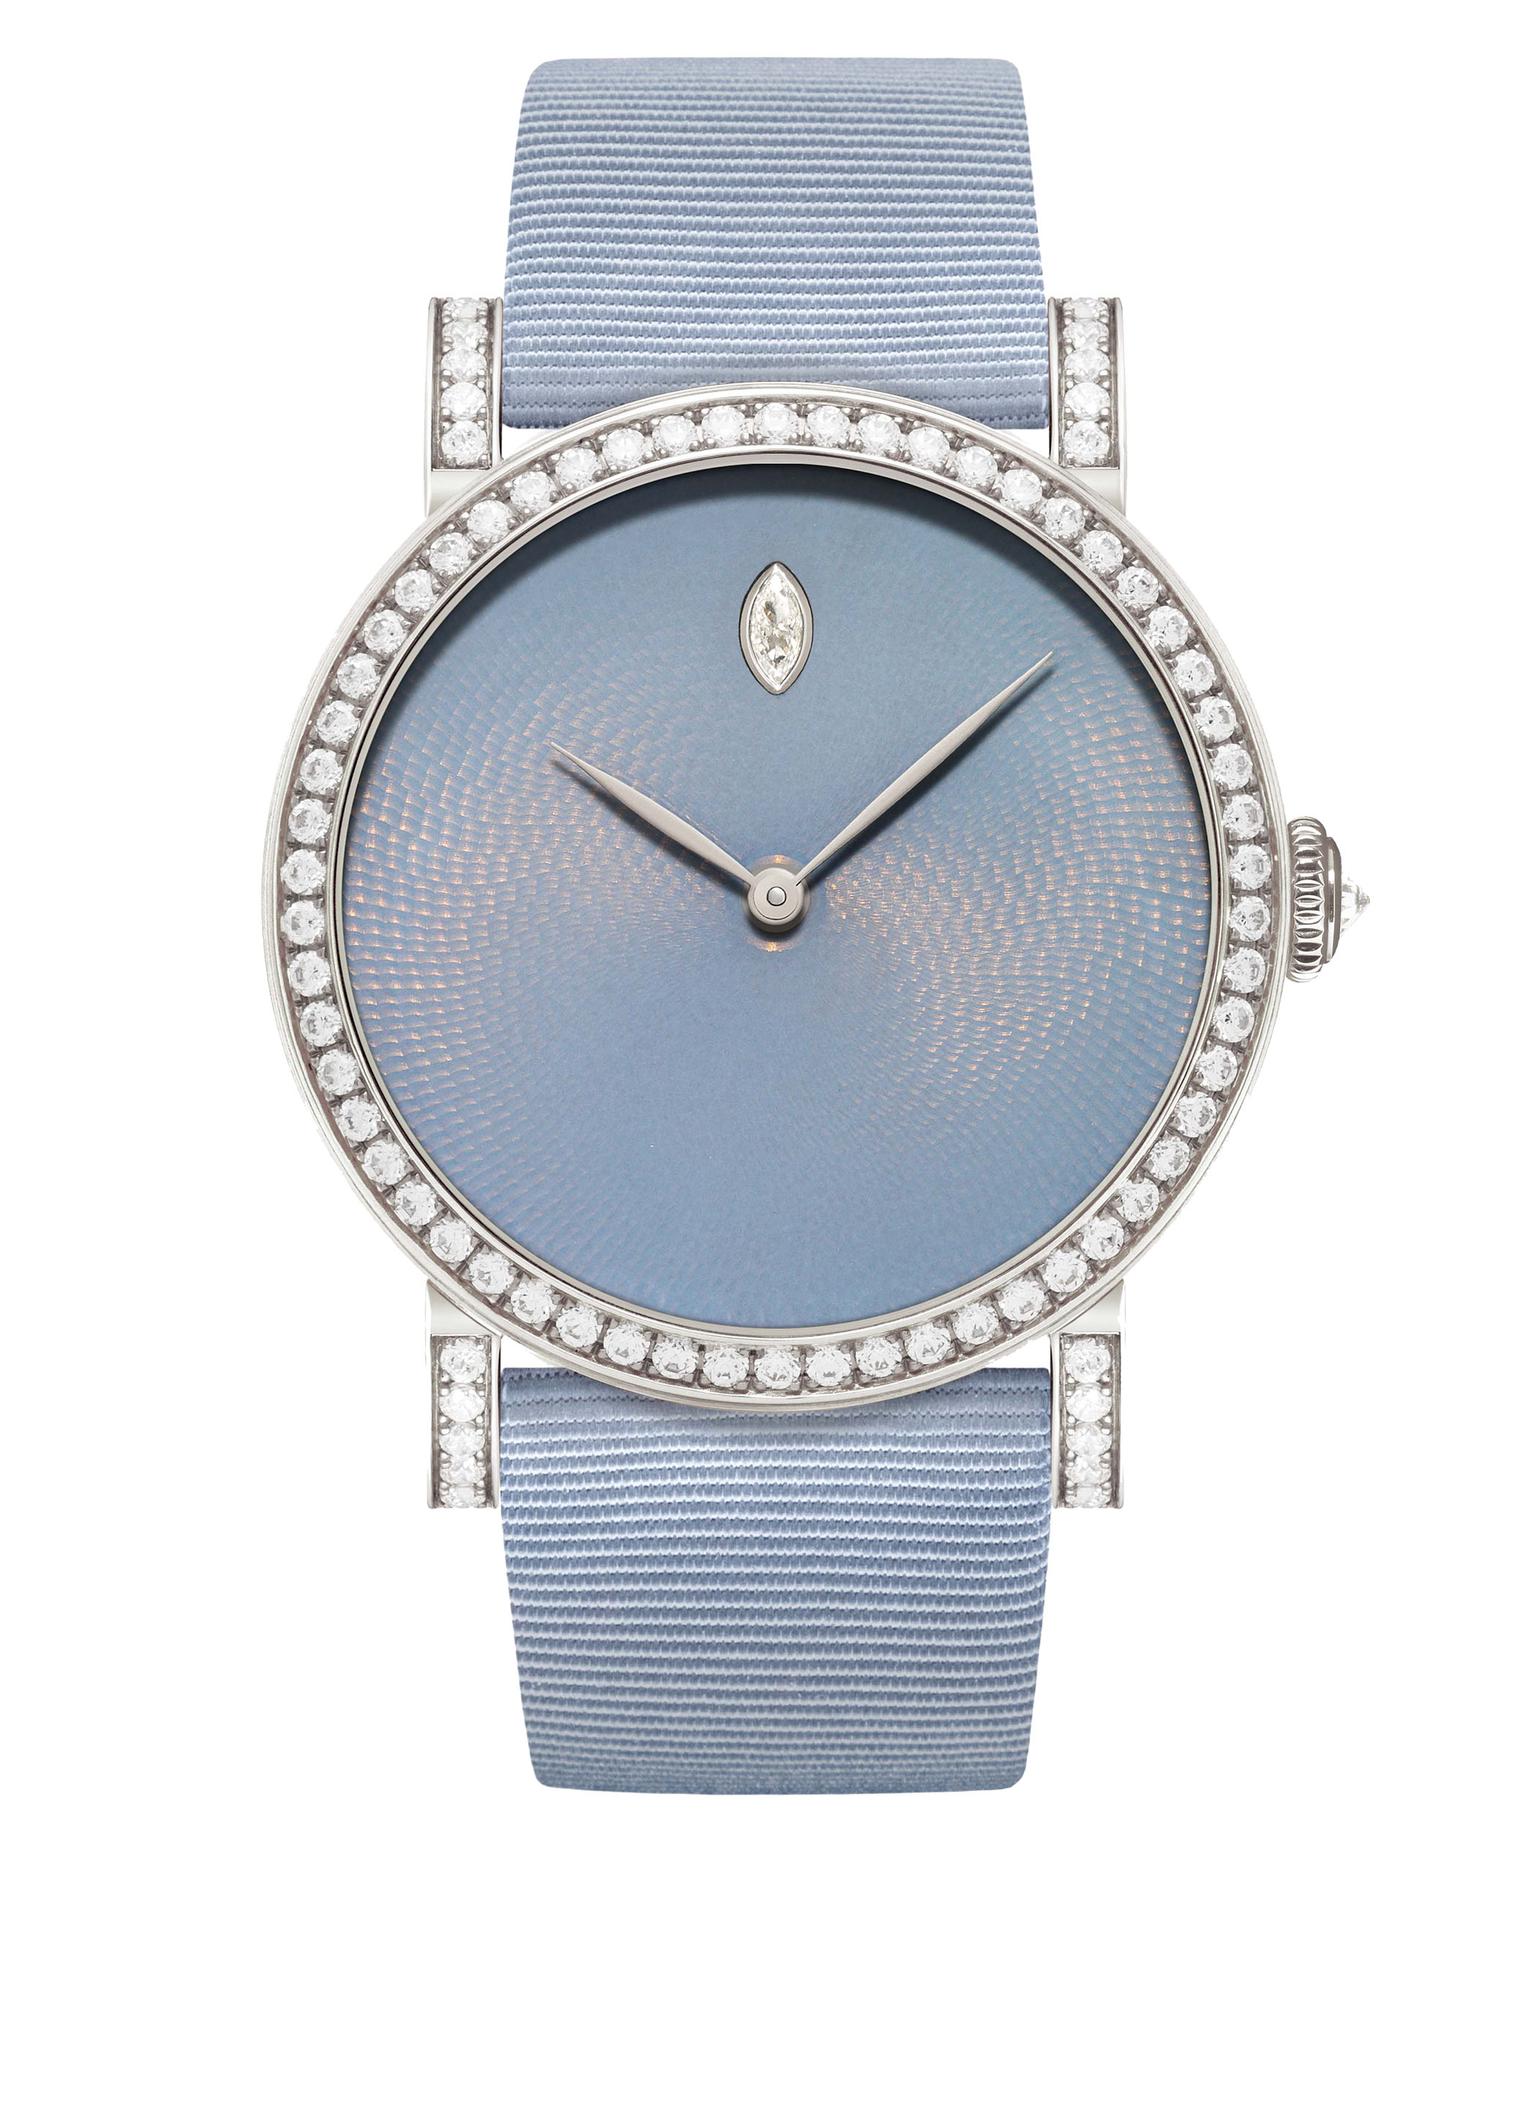 The DeLaneau Rondo Translucent Hoar Frost watch has a 36mm white gold case set alight with 272 diamonds encircling the bezel and lugs. The mysterious greyish-blue enamel dial is punctuated by a single diamond drop marking the hour at 12 o'clock.